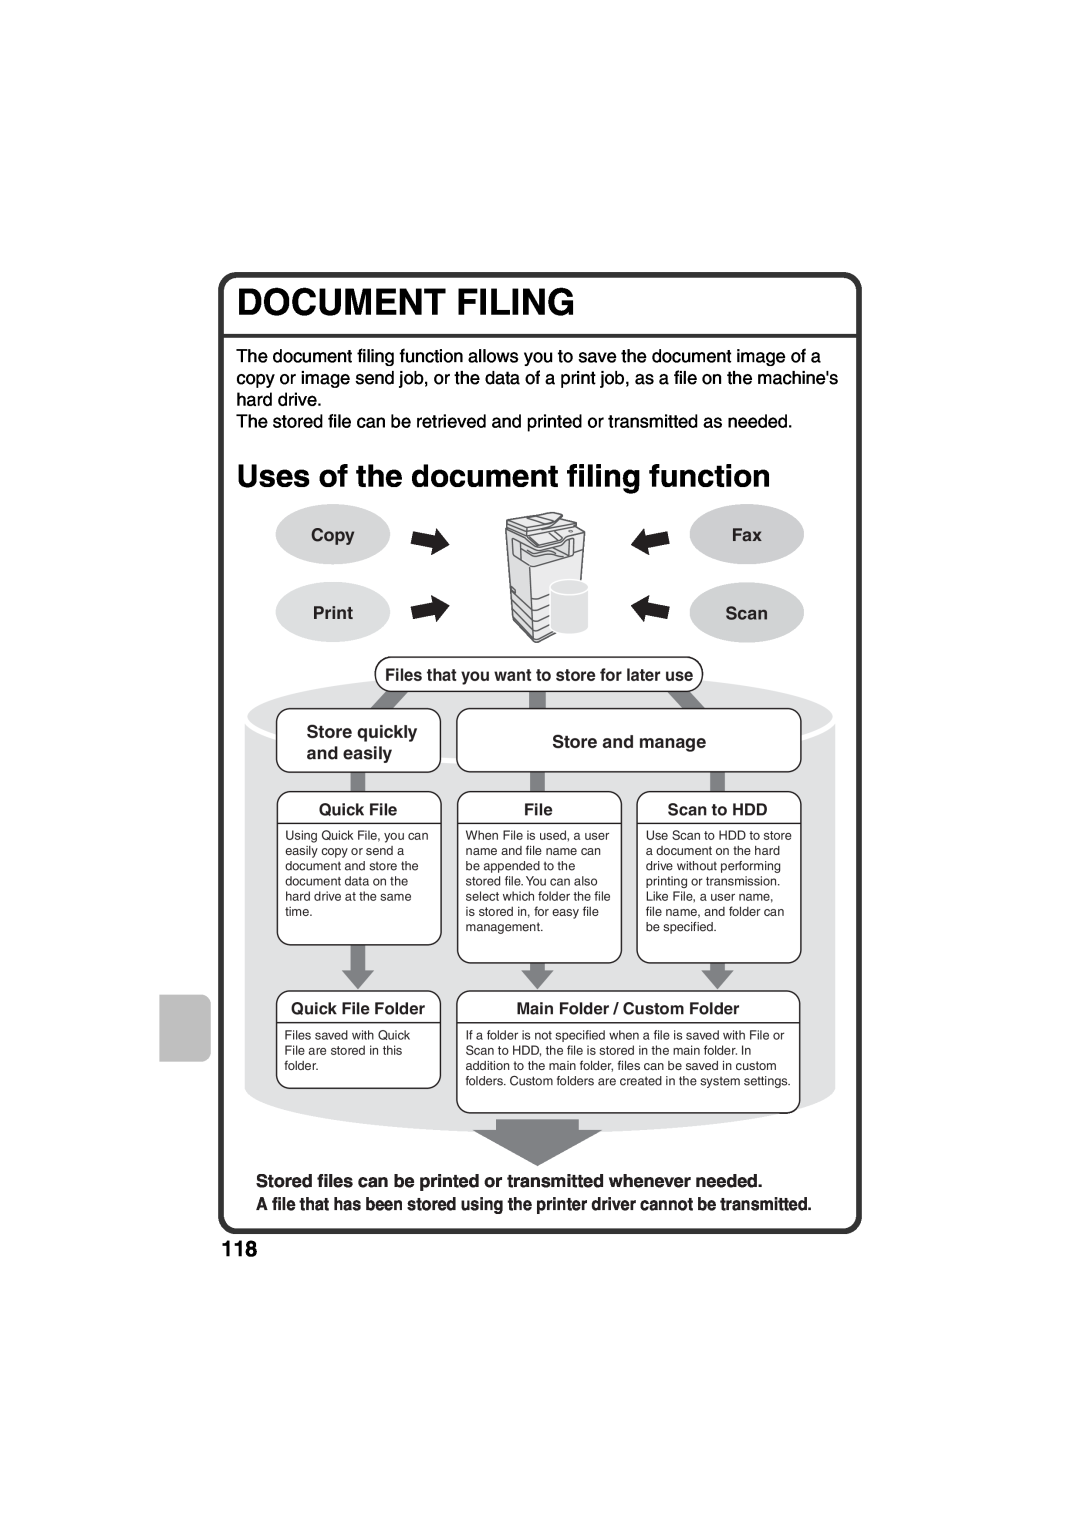 Sharp MX-B401 quick start Document Filing, Uses of the document filing function, Copy, Print, and easily, Store and manage 